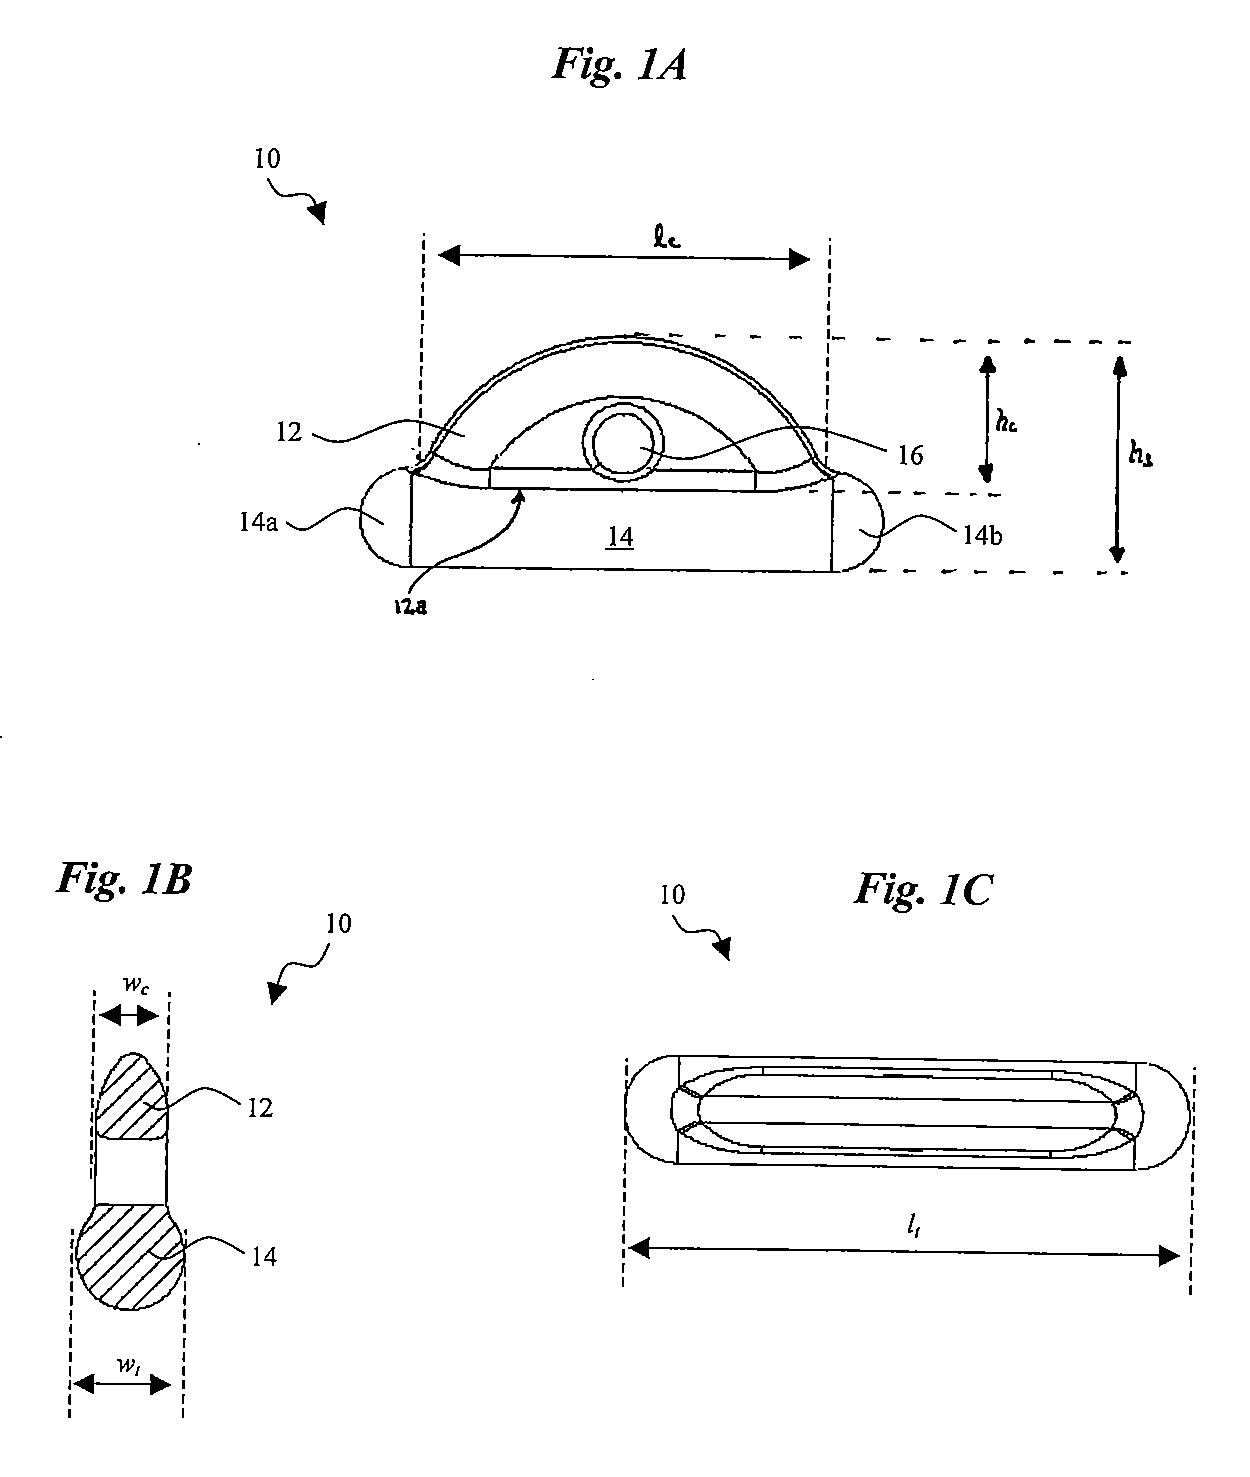 Methods and devices for repairing triangular fibrocartilage complex tears